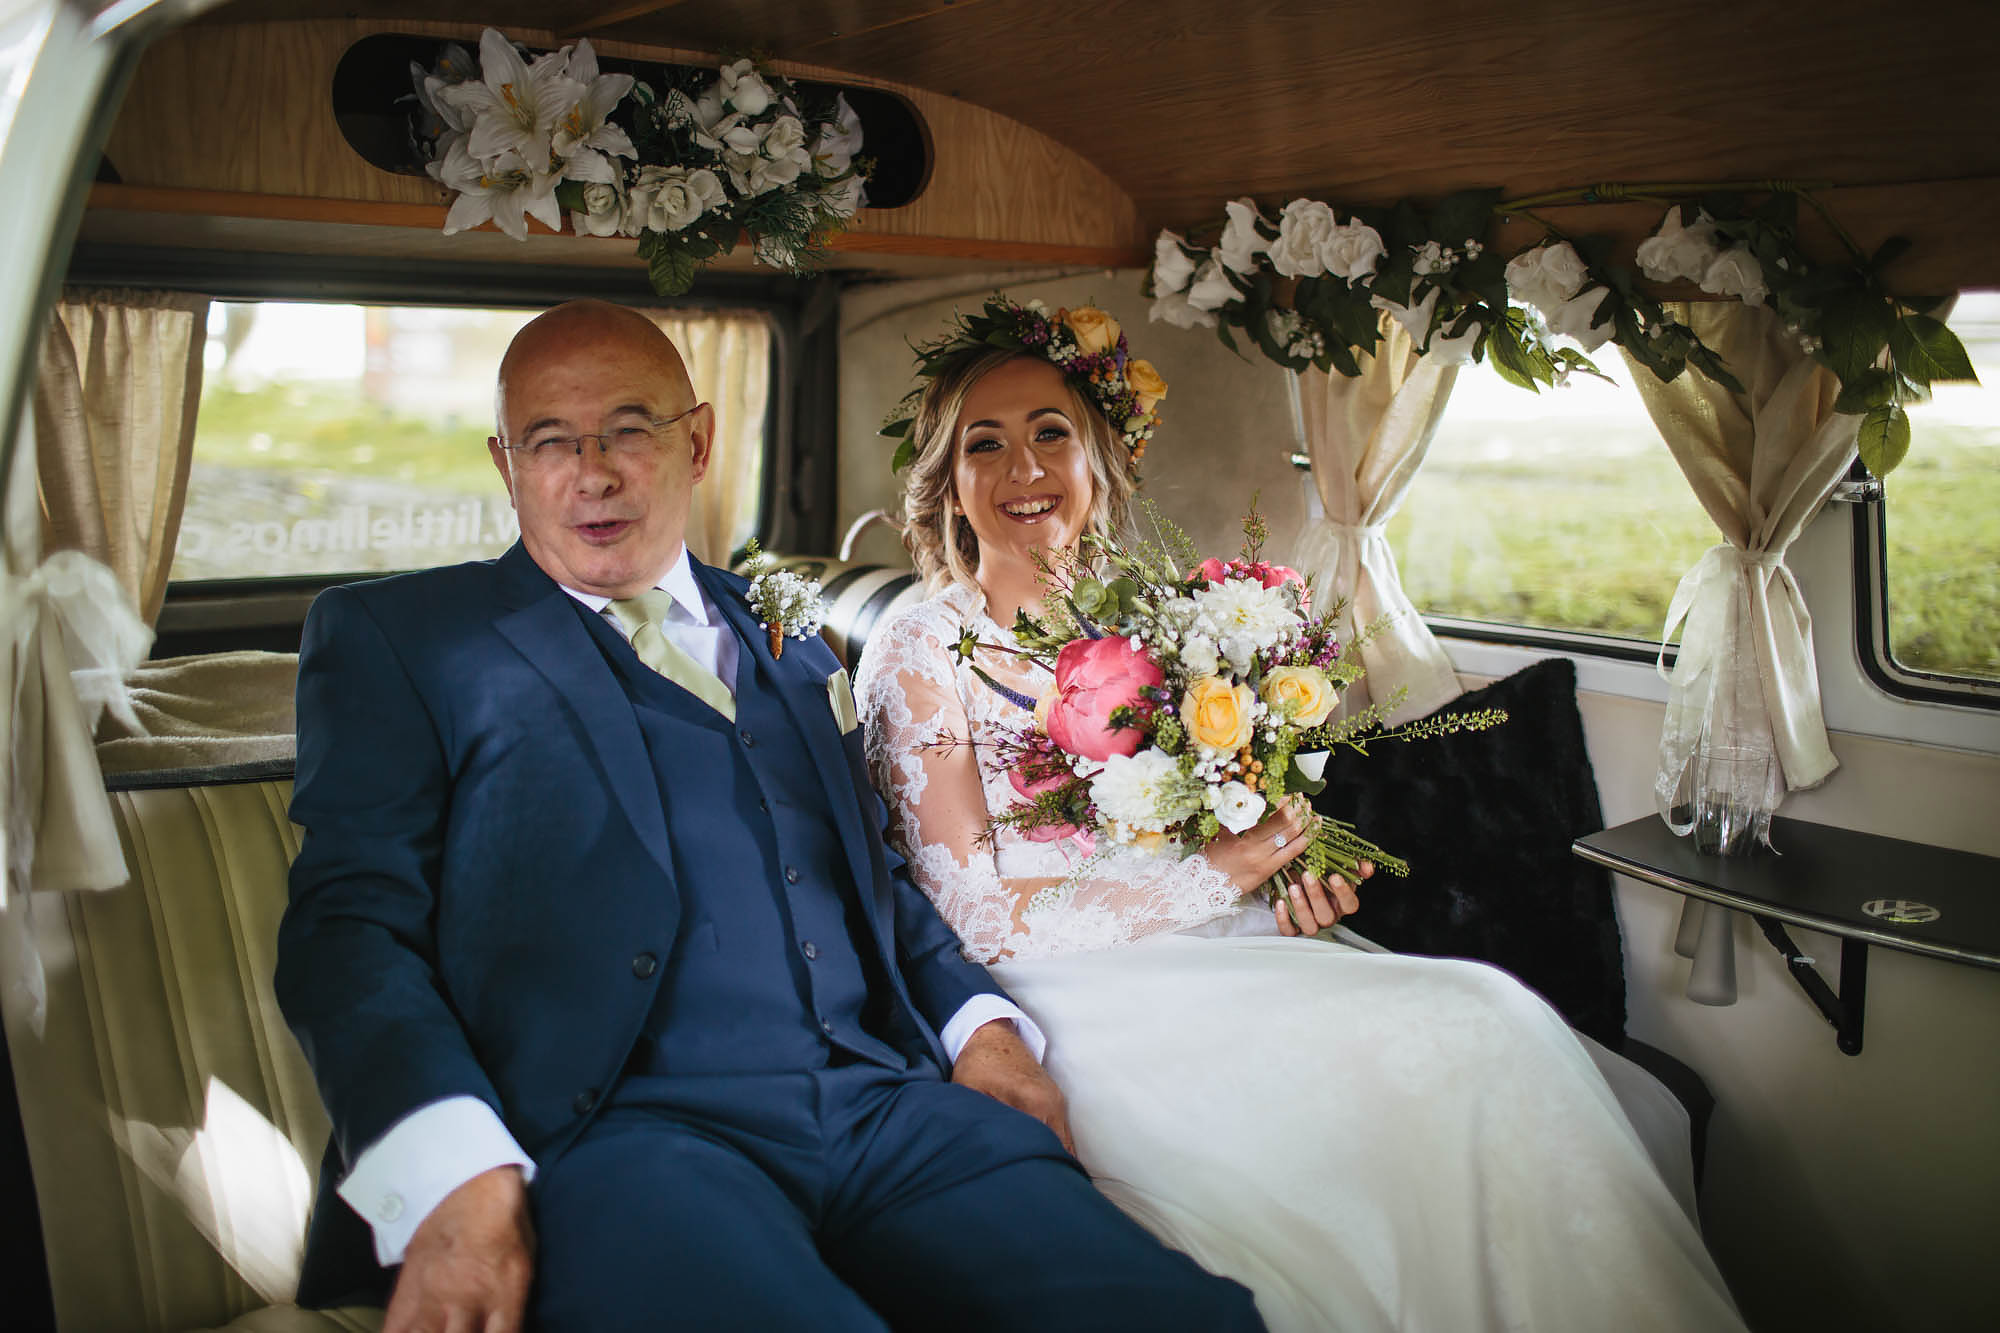 Bride and father arrive in VW camper van at a wedding